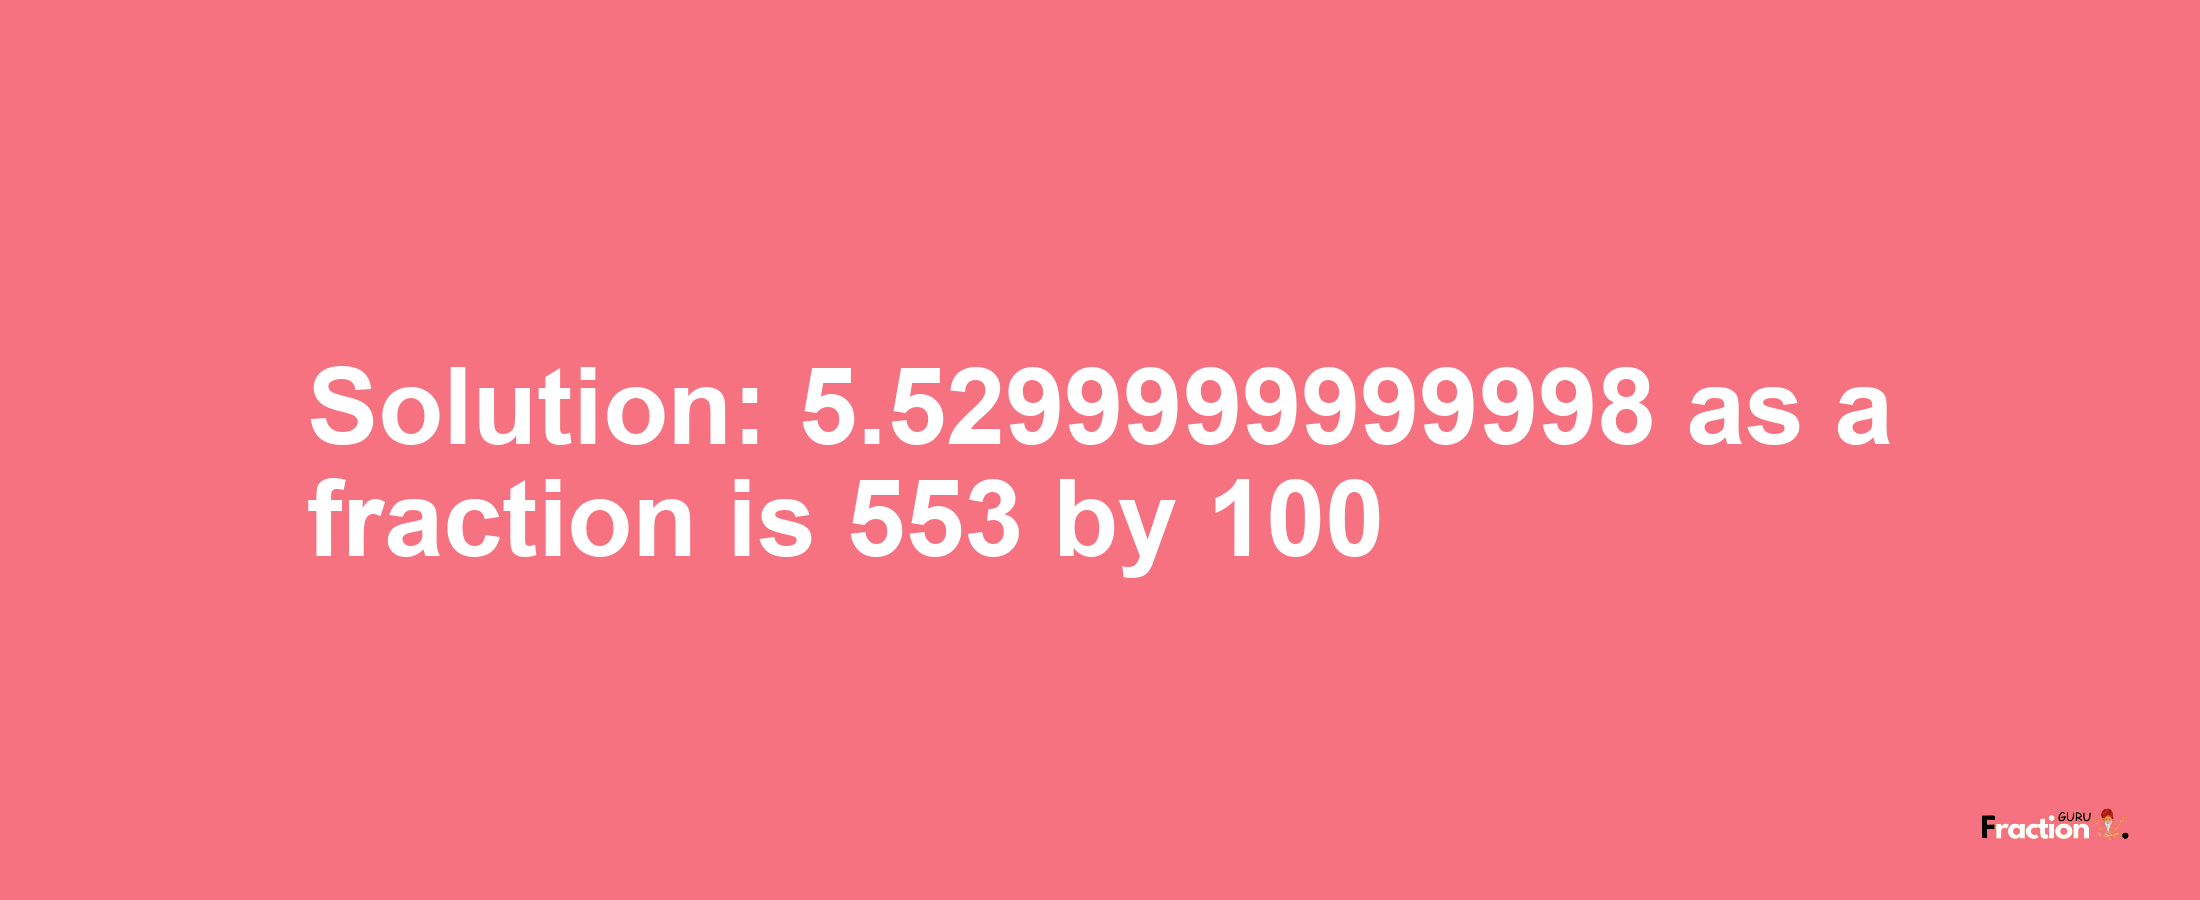 Solution:5.5299999999998 as a fraction is 553/100